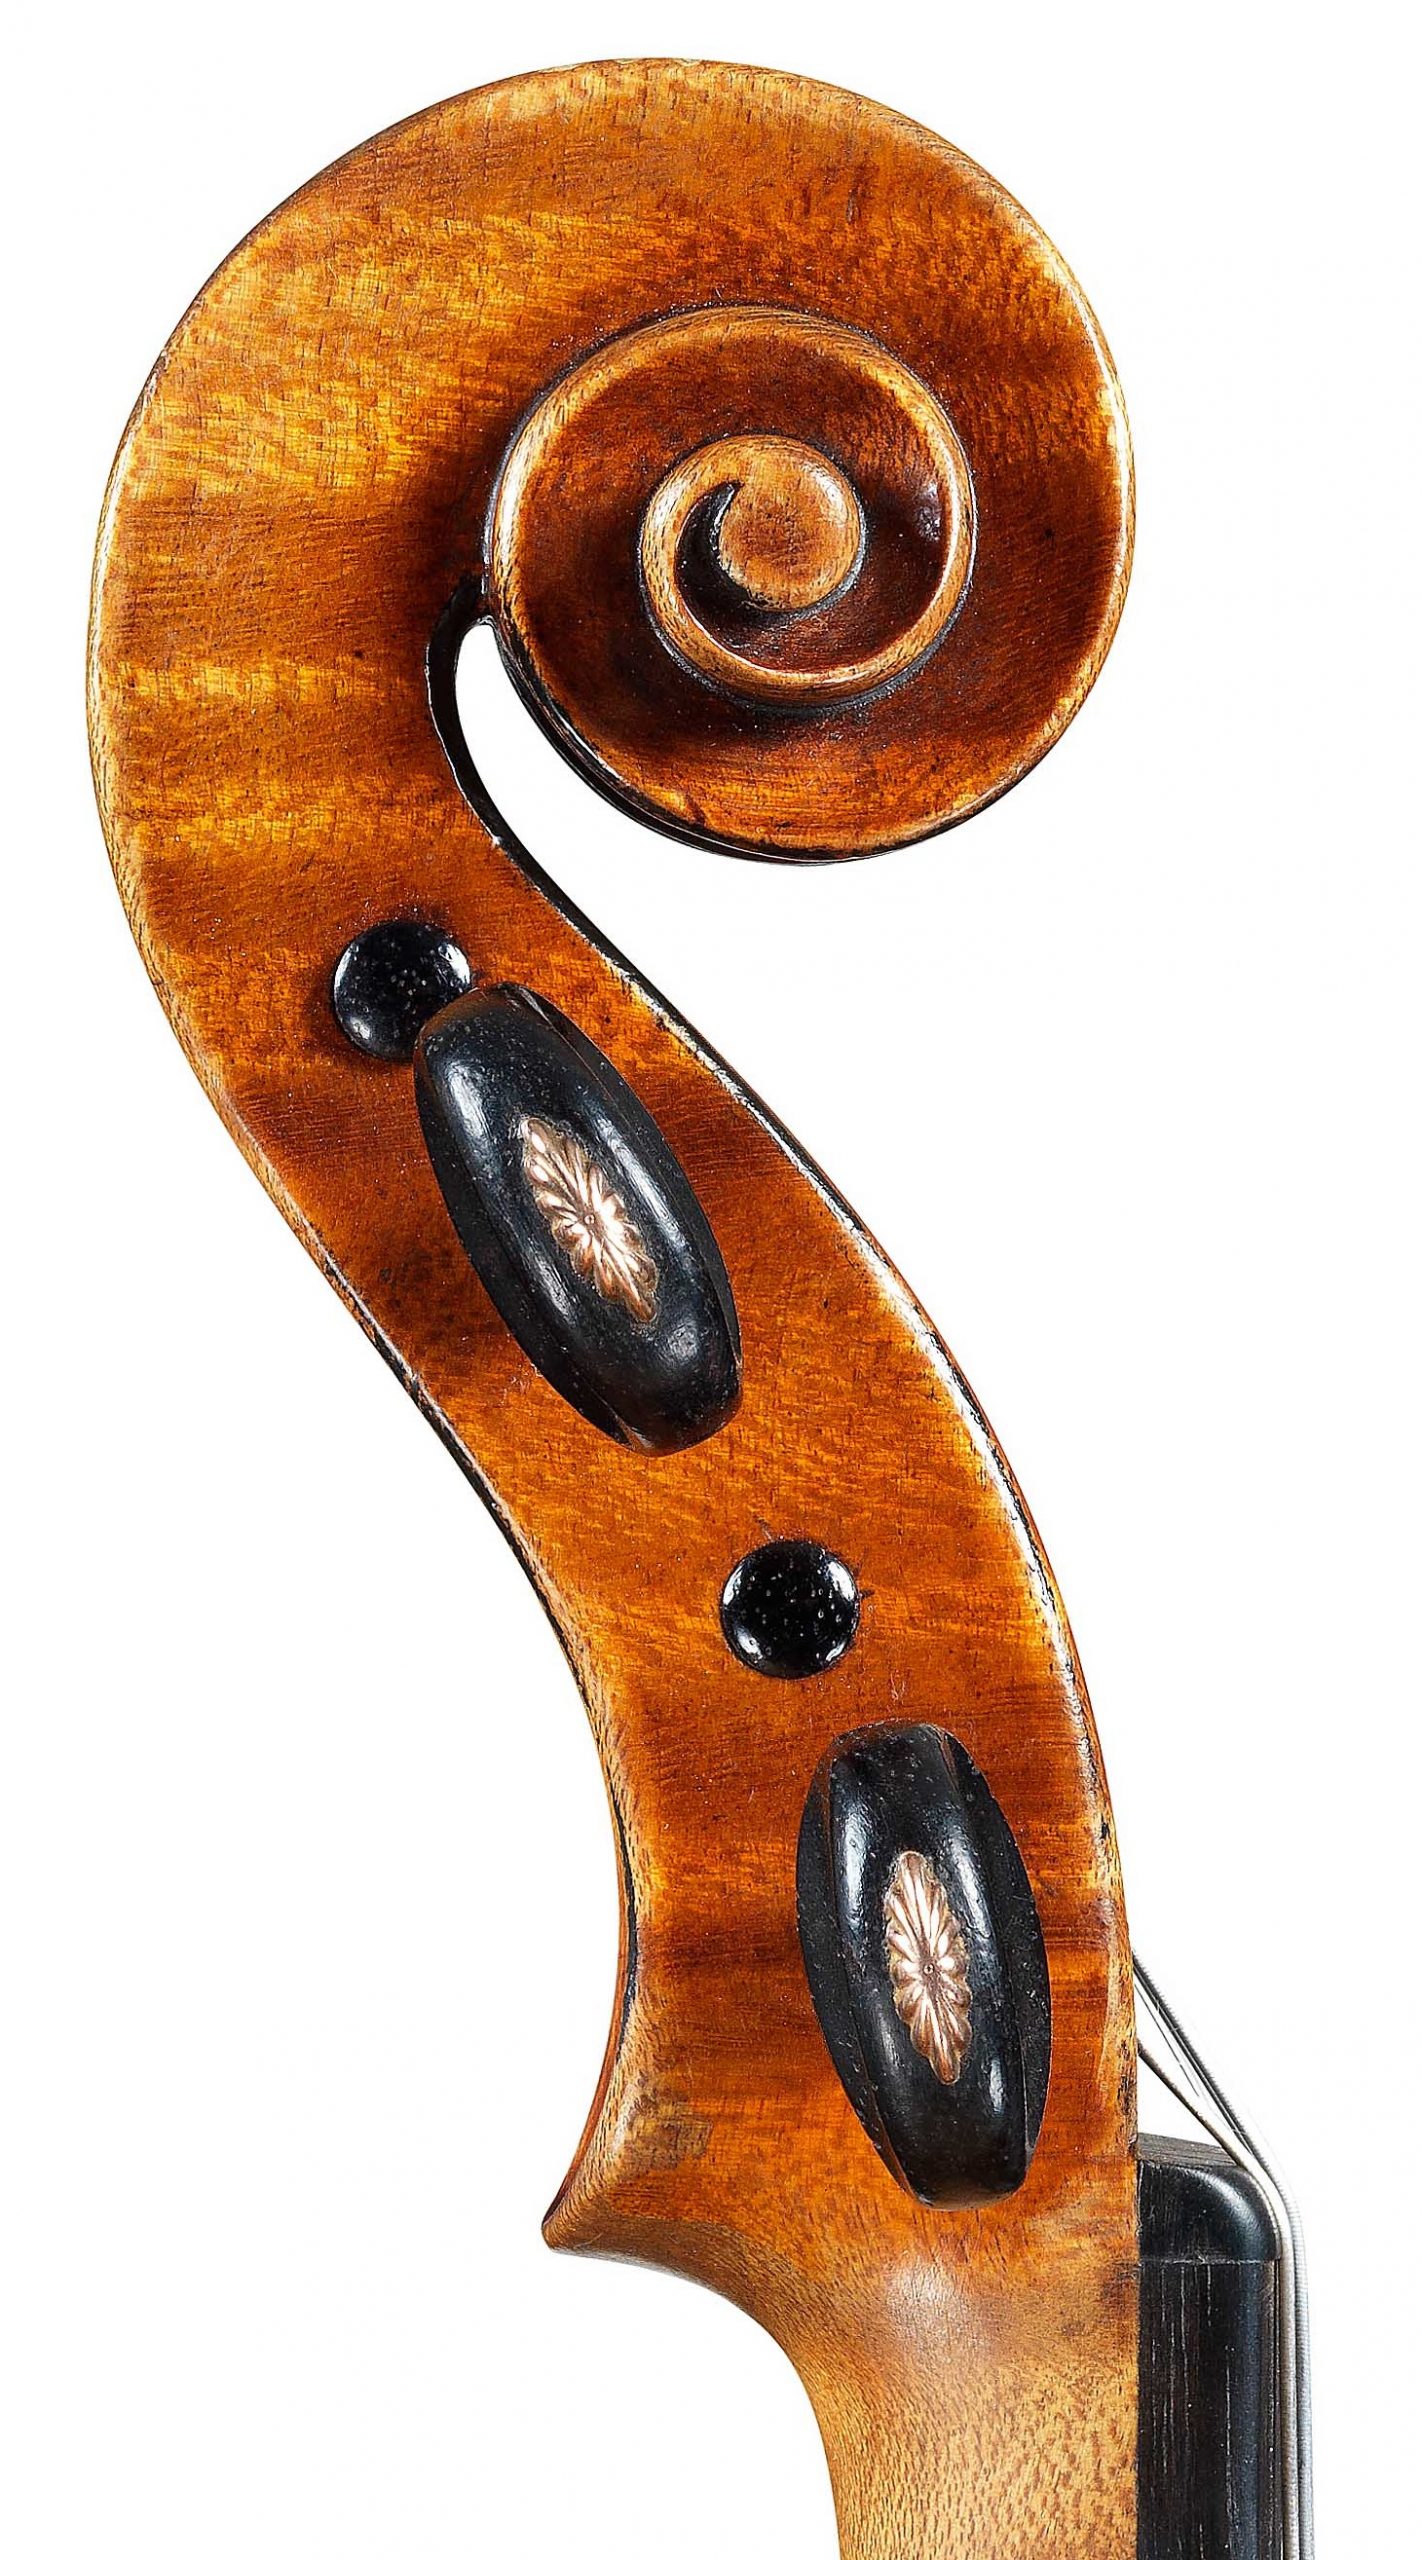 Scroll of decorated violin by JB Vuillaume, ex-Caraman de Chimay, dated 1865, exhibited by Ingles & Hayday at Sotheby's in 2012